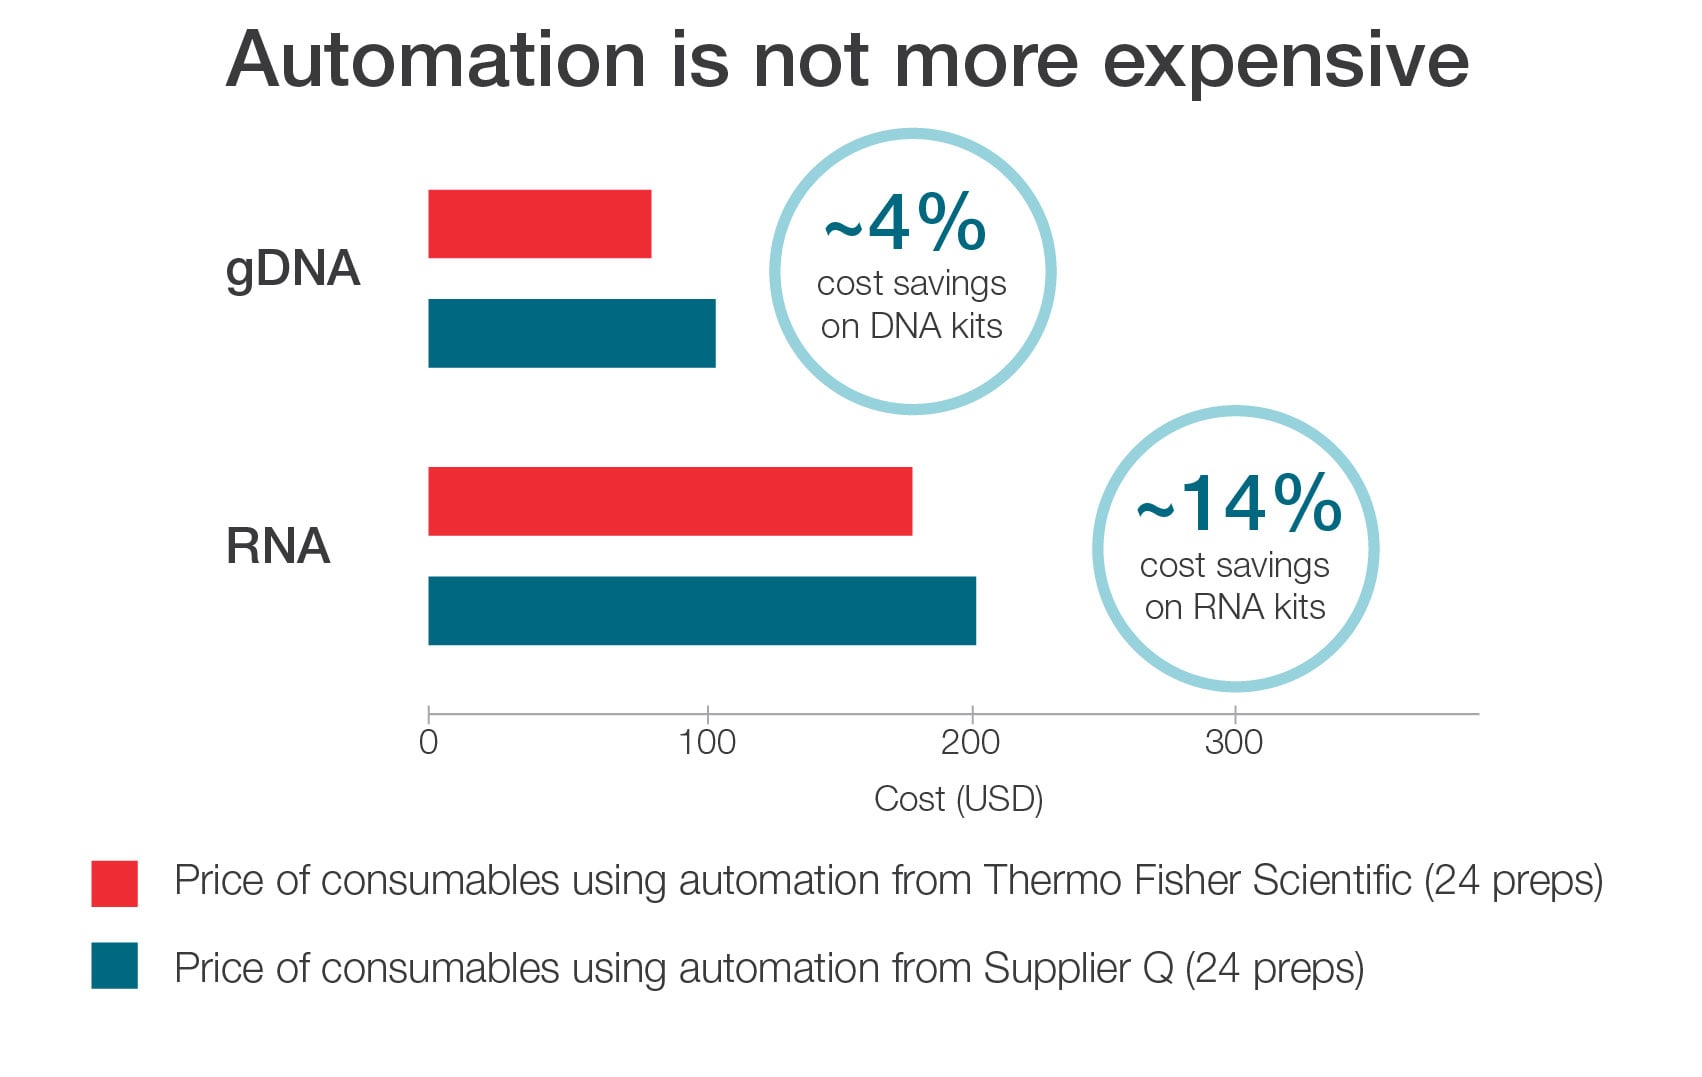 Automation is not more expensive